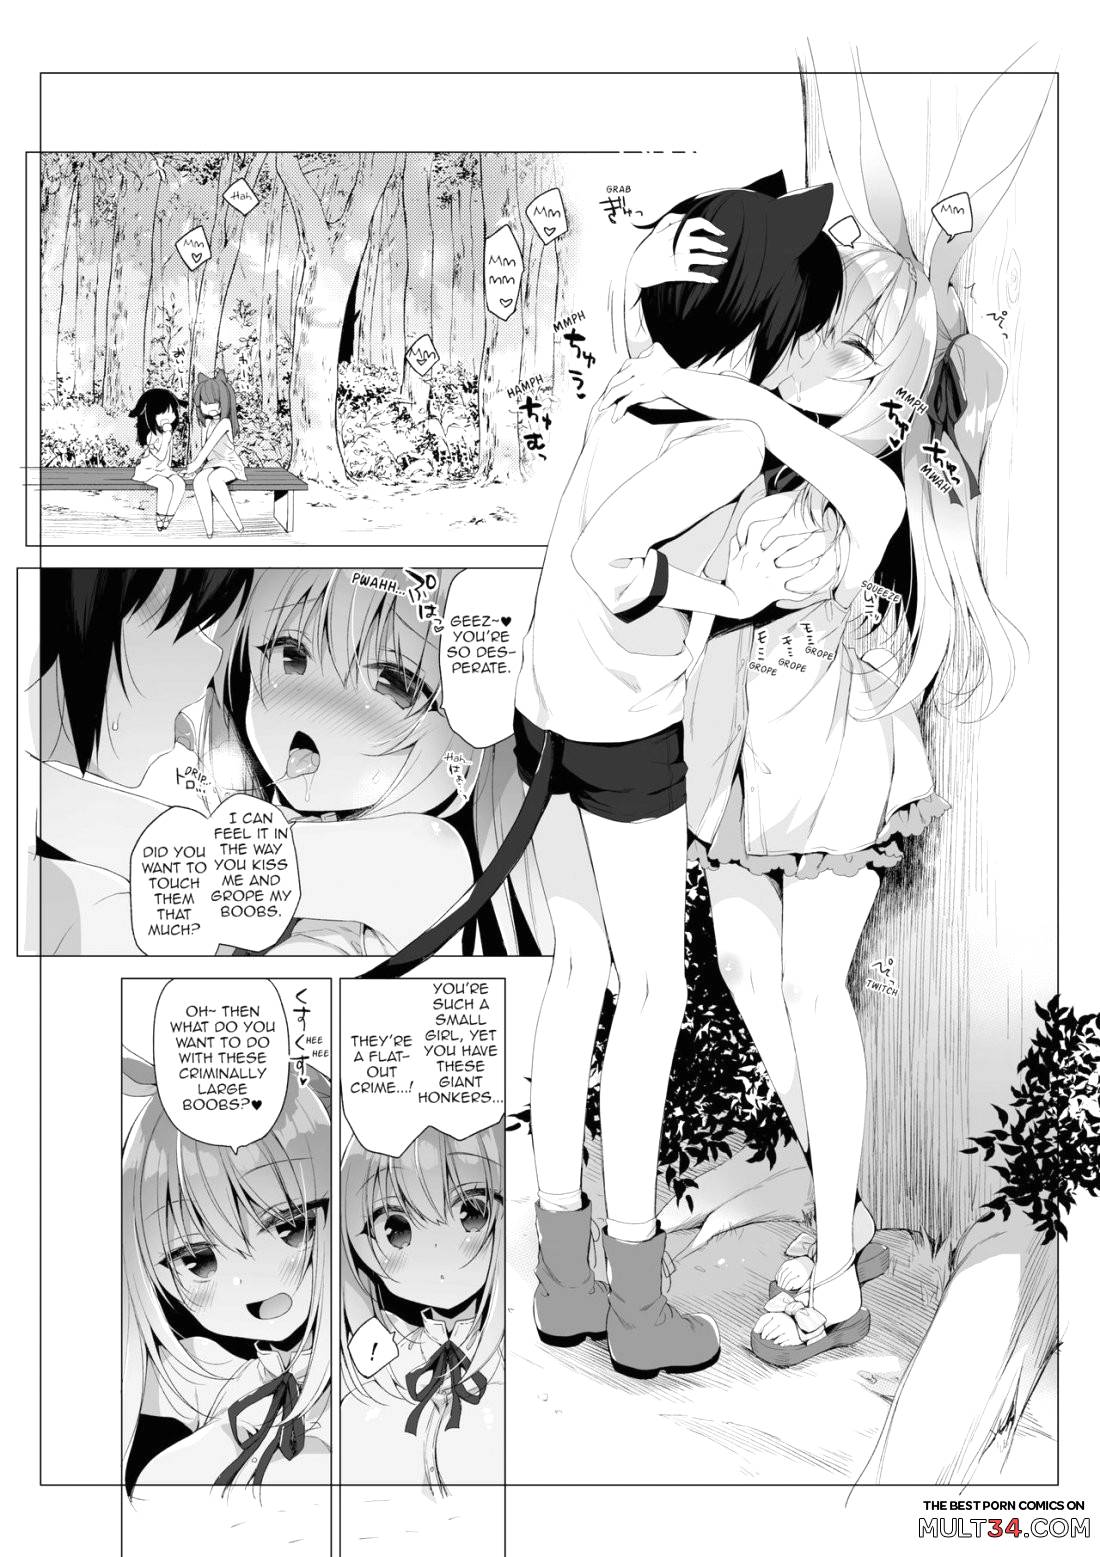 My Ideal Life in Another World Vol 6 page 13